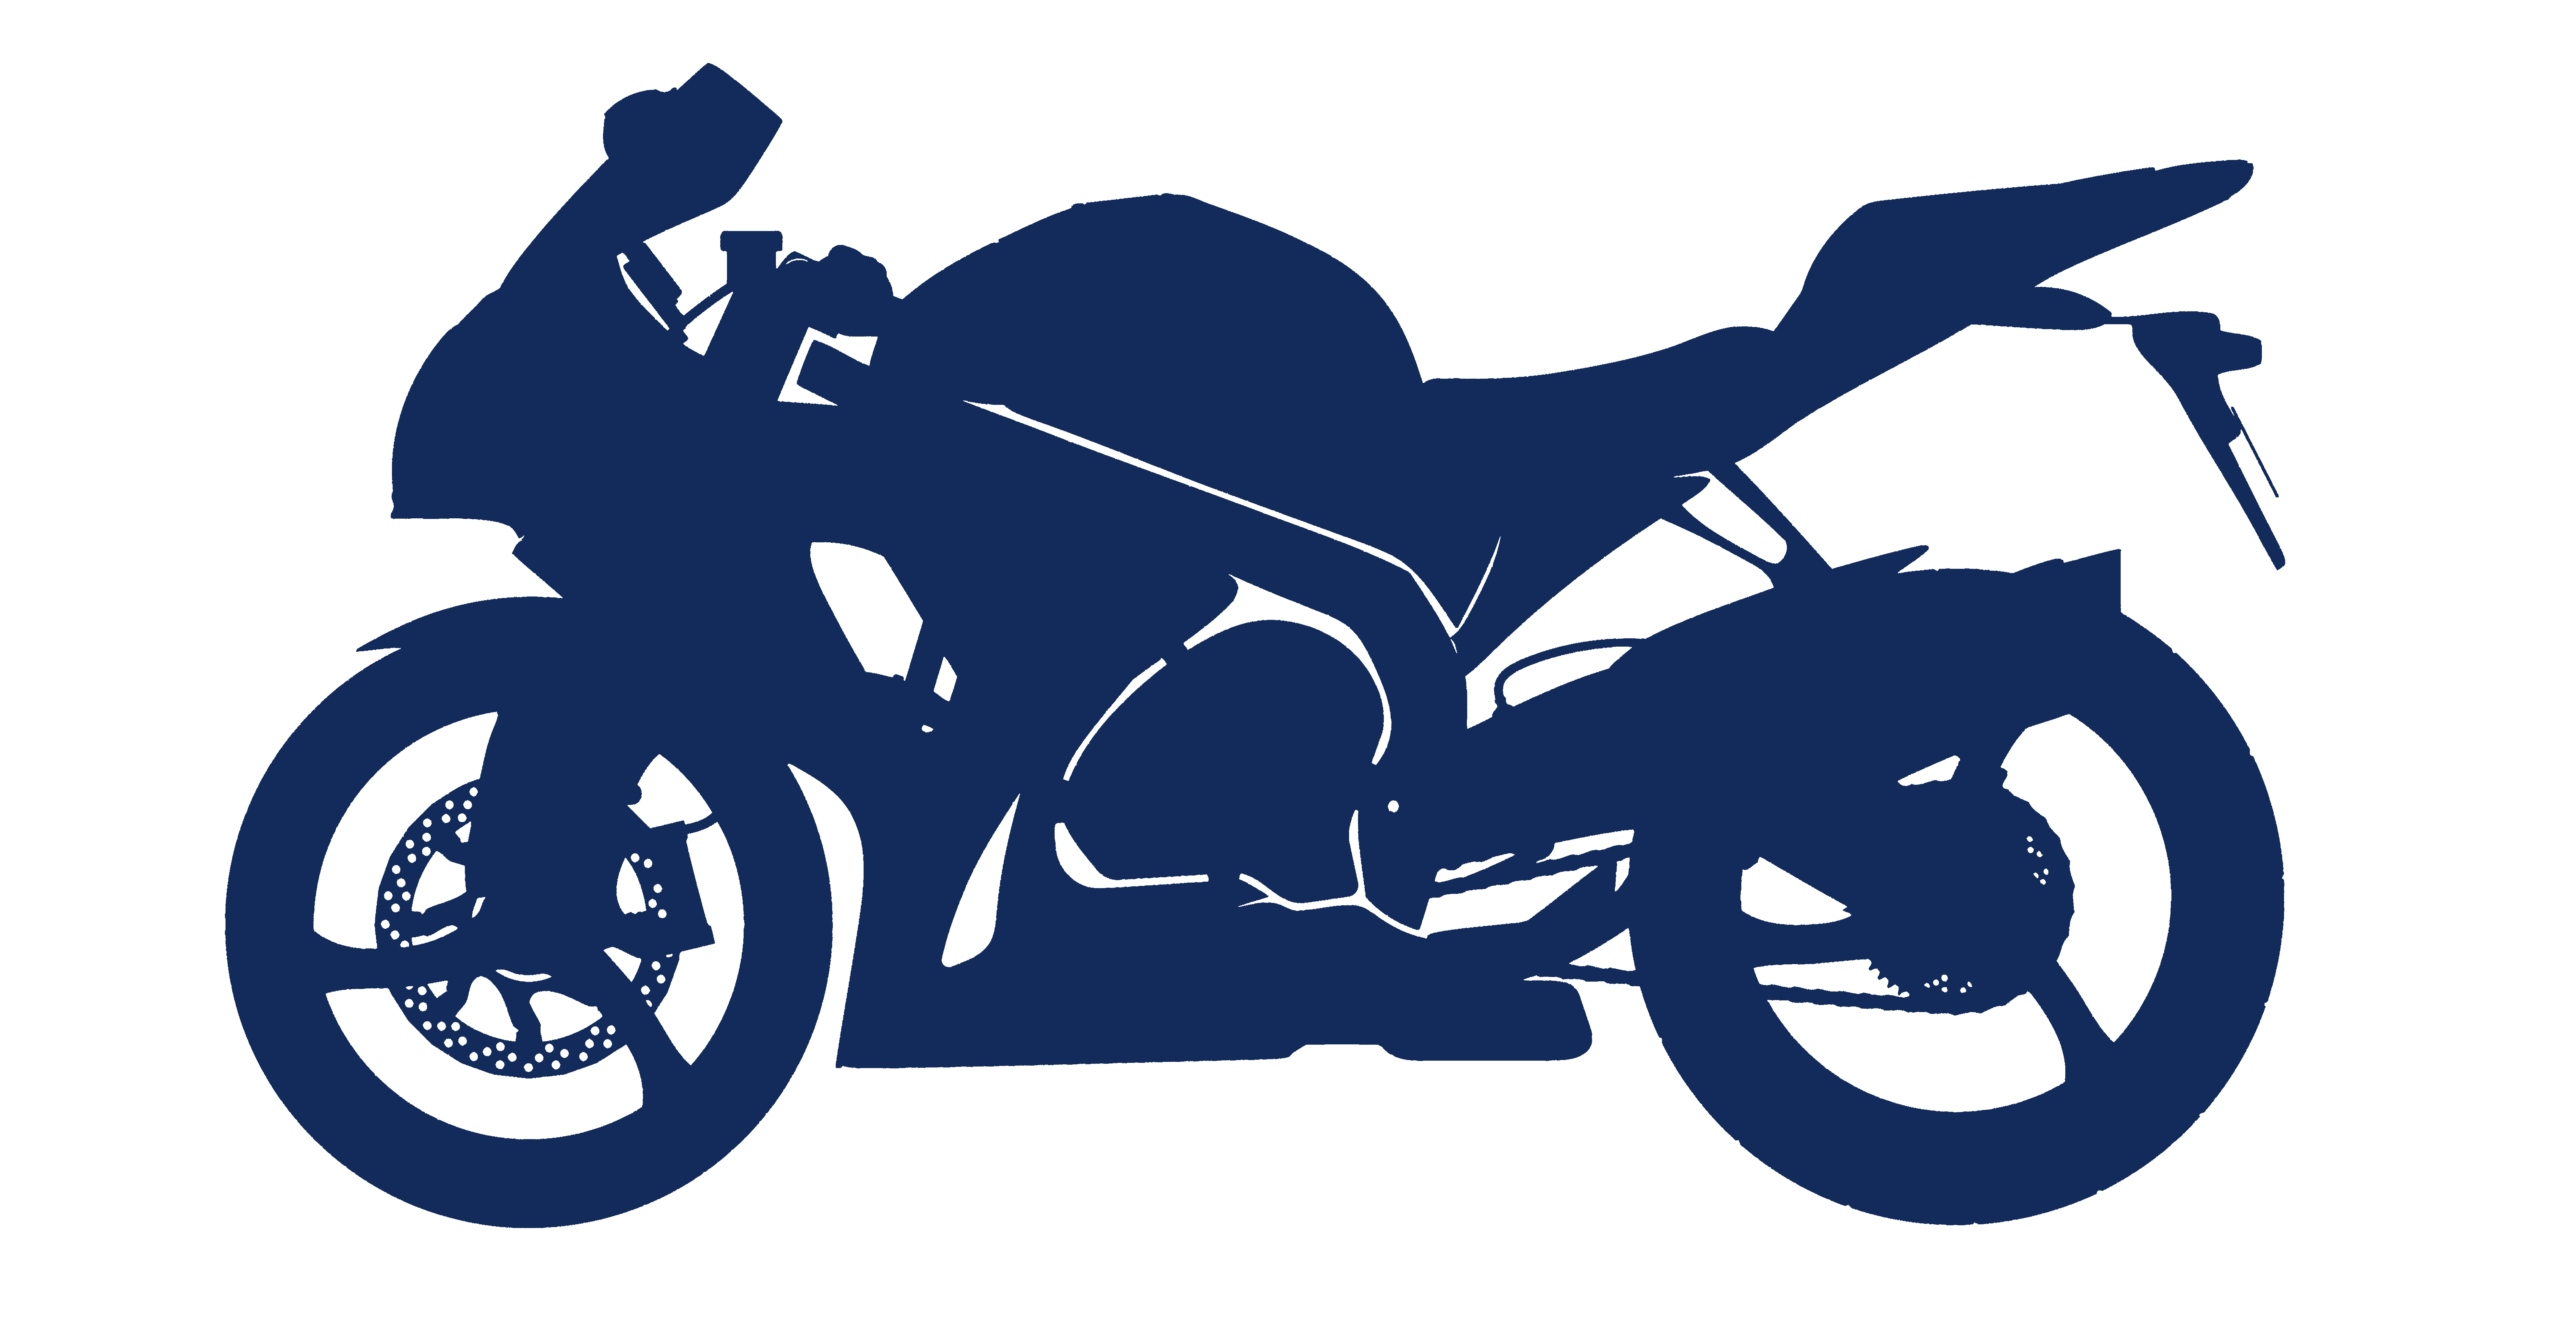 Blue silhouette of a sport motorcycle